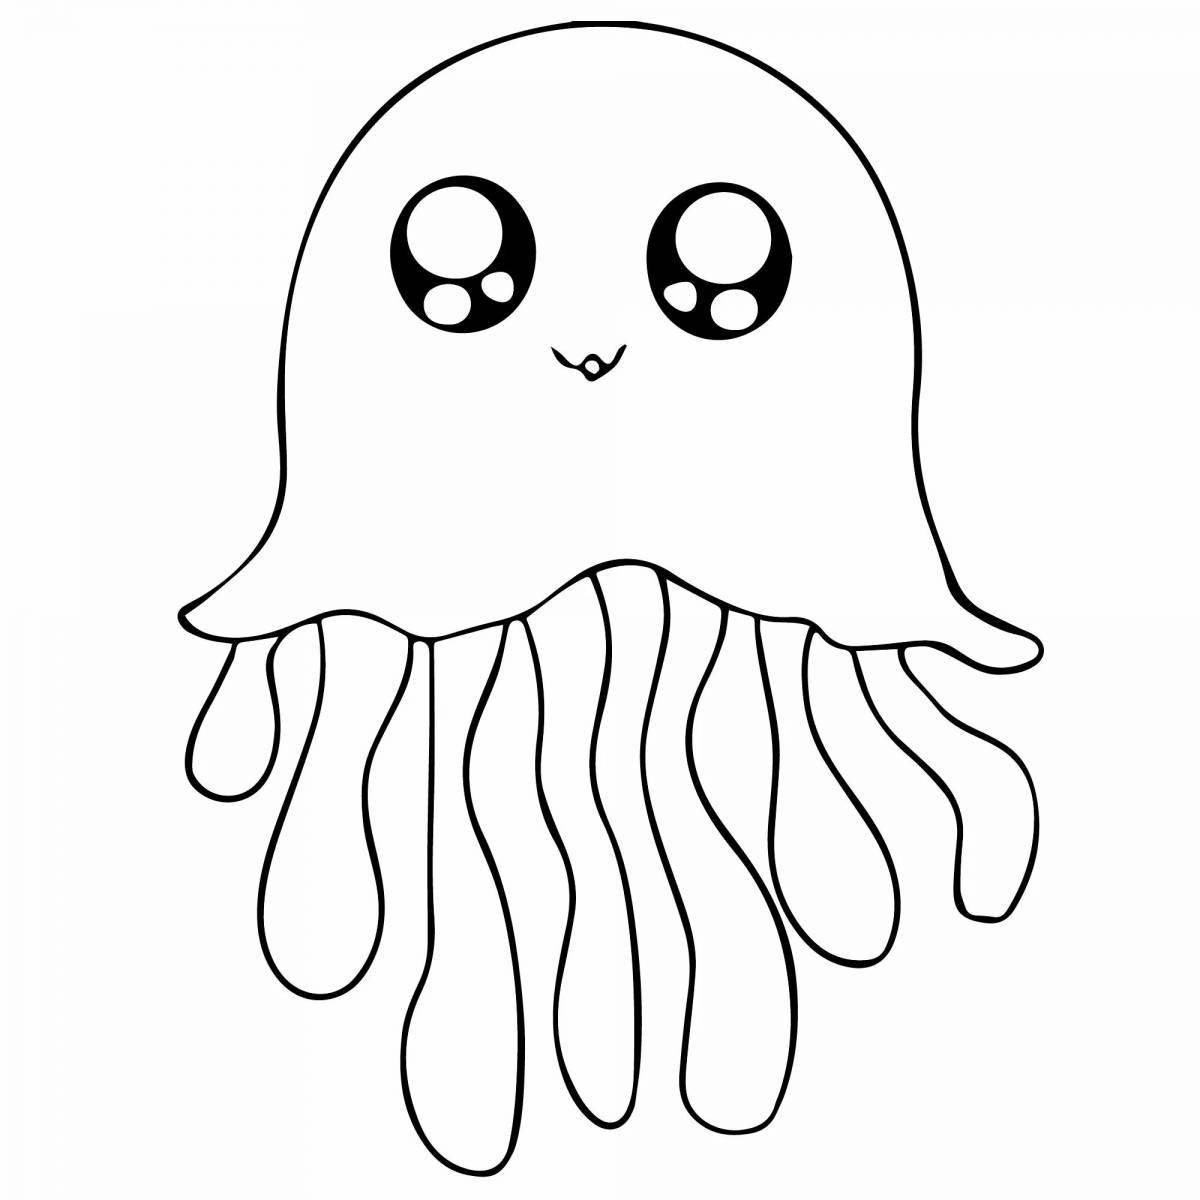 Merry jellyfish coloring book for kids